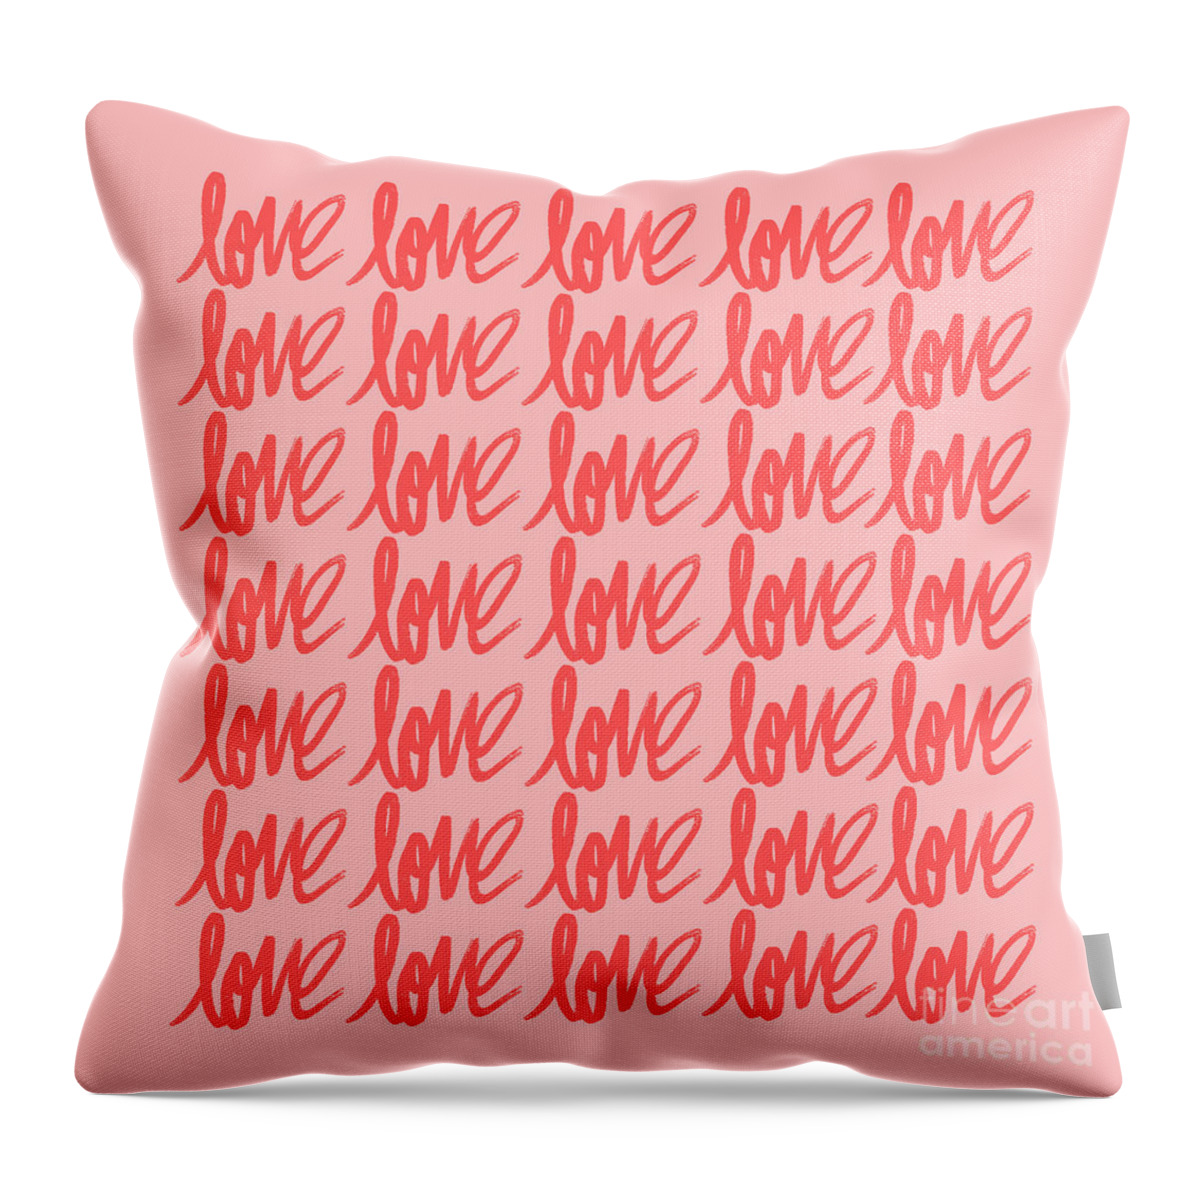 Typography Throw Pillow featuring the digital art Love by Christie Olstad